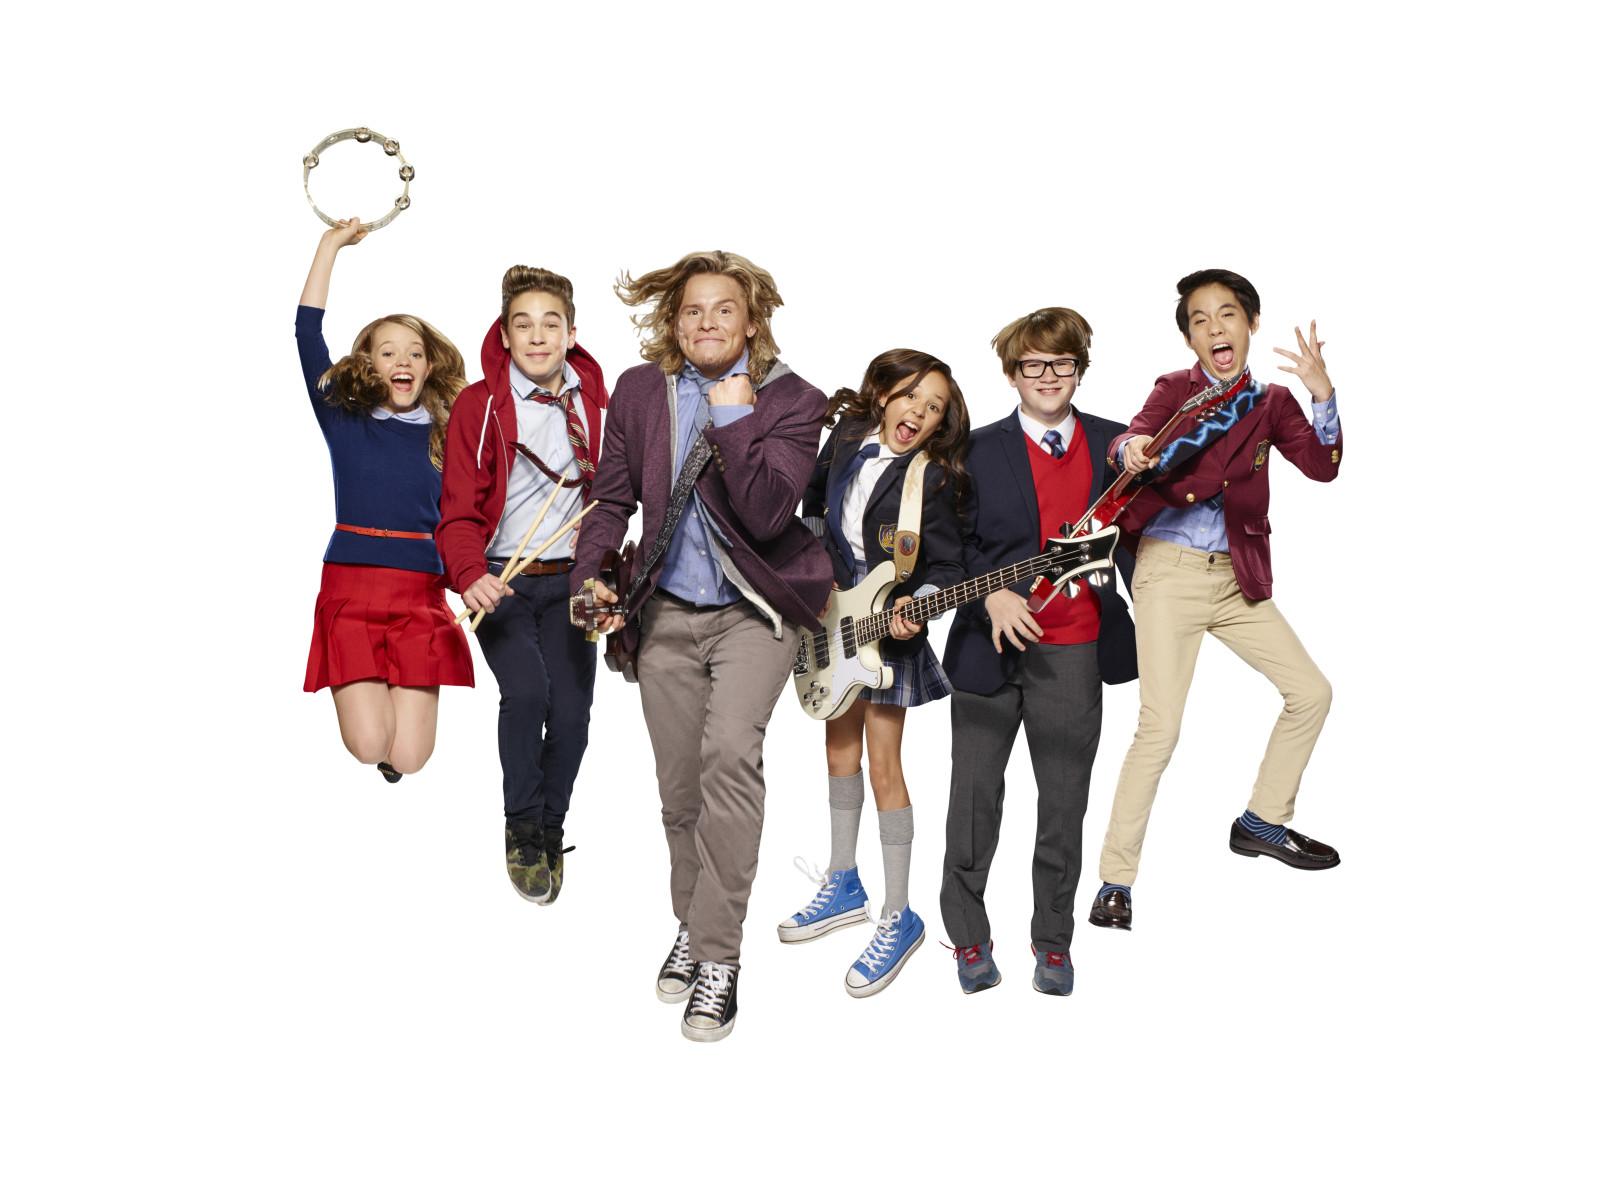 Tune In and Rock Out With the New Comedy Series School